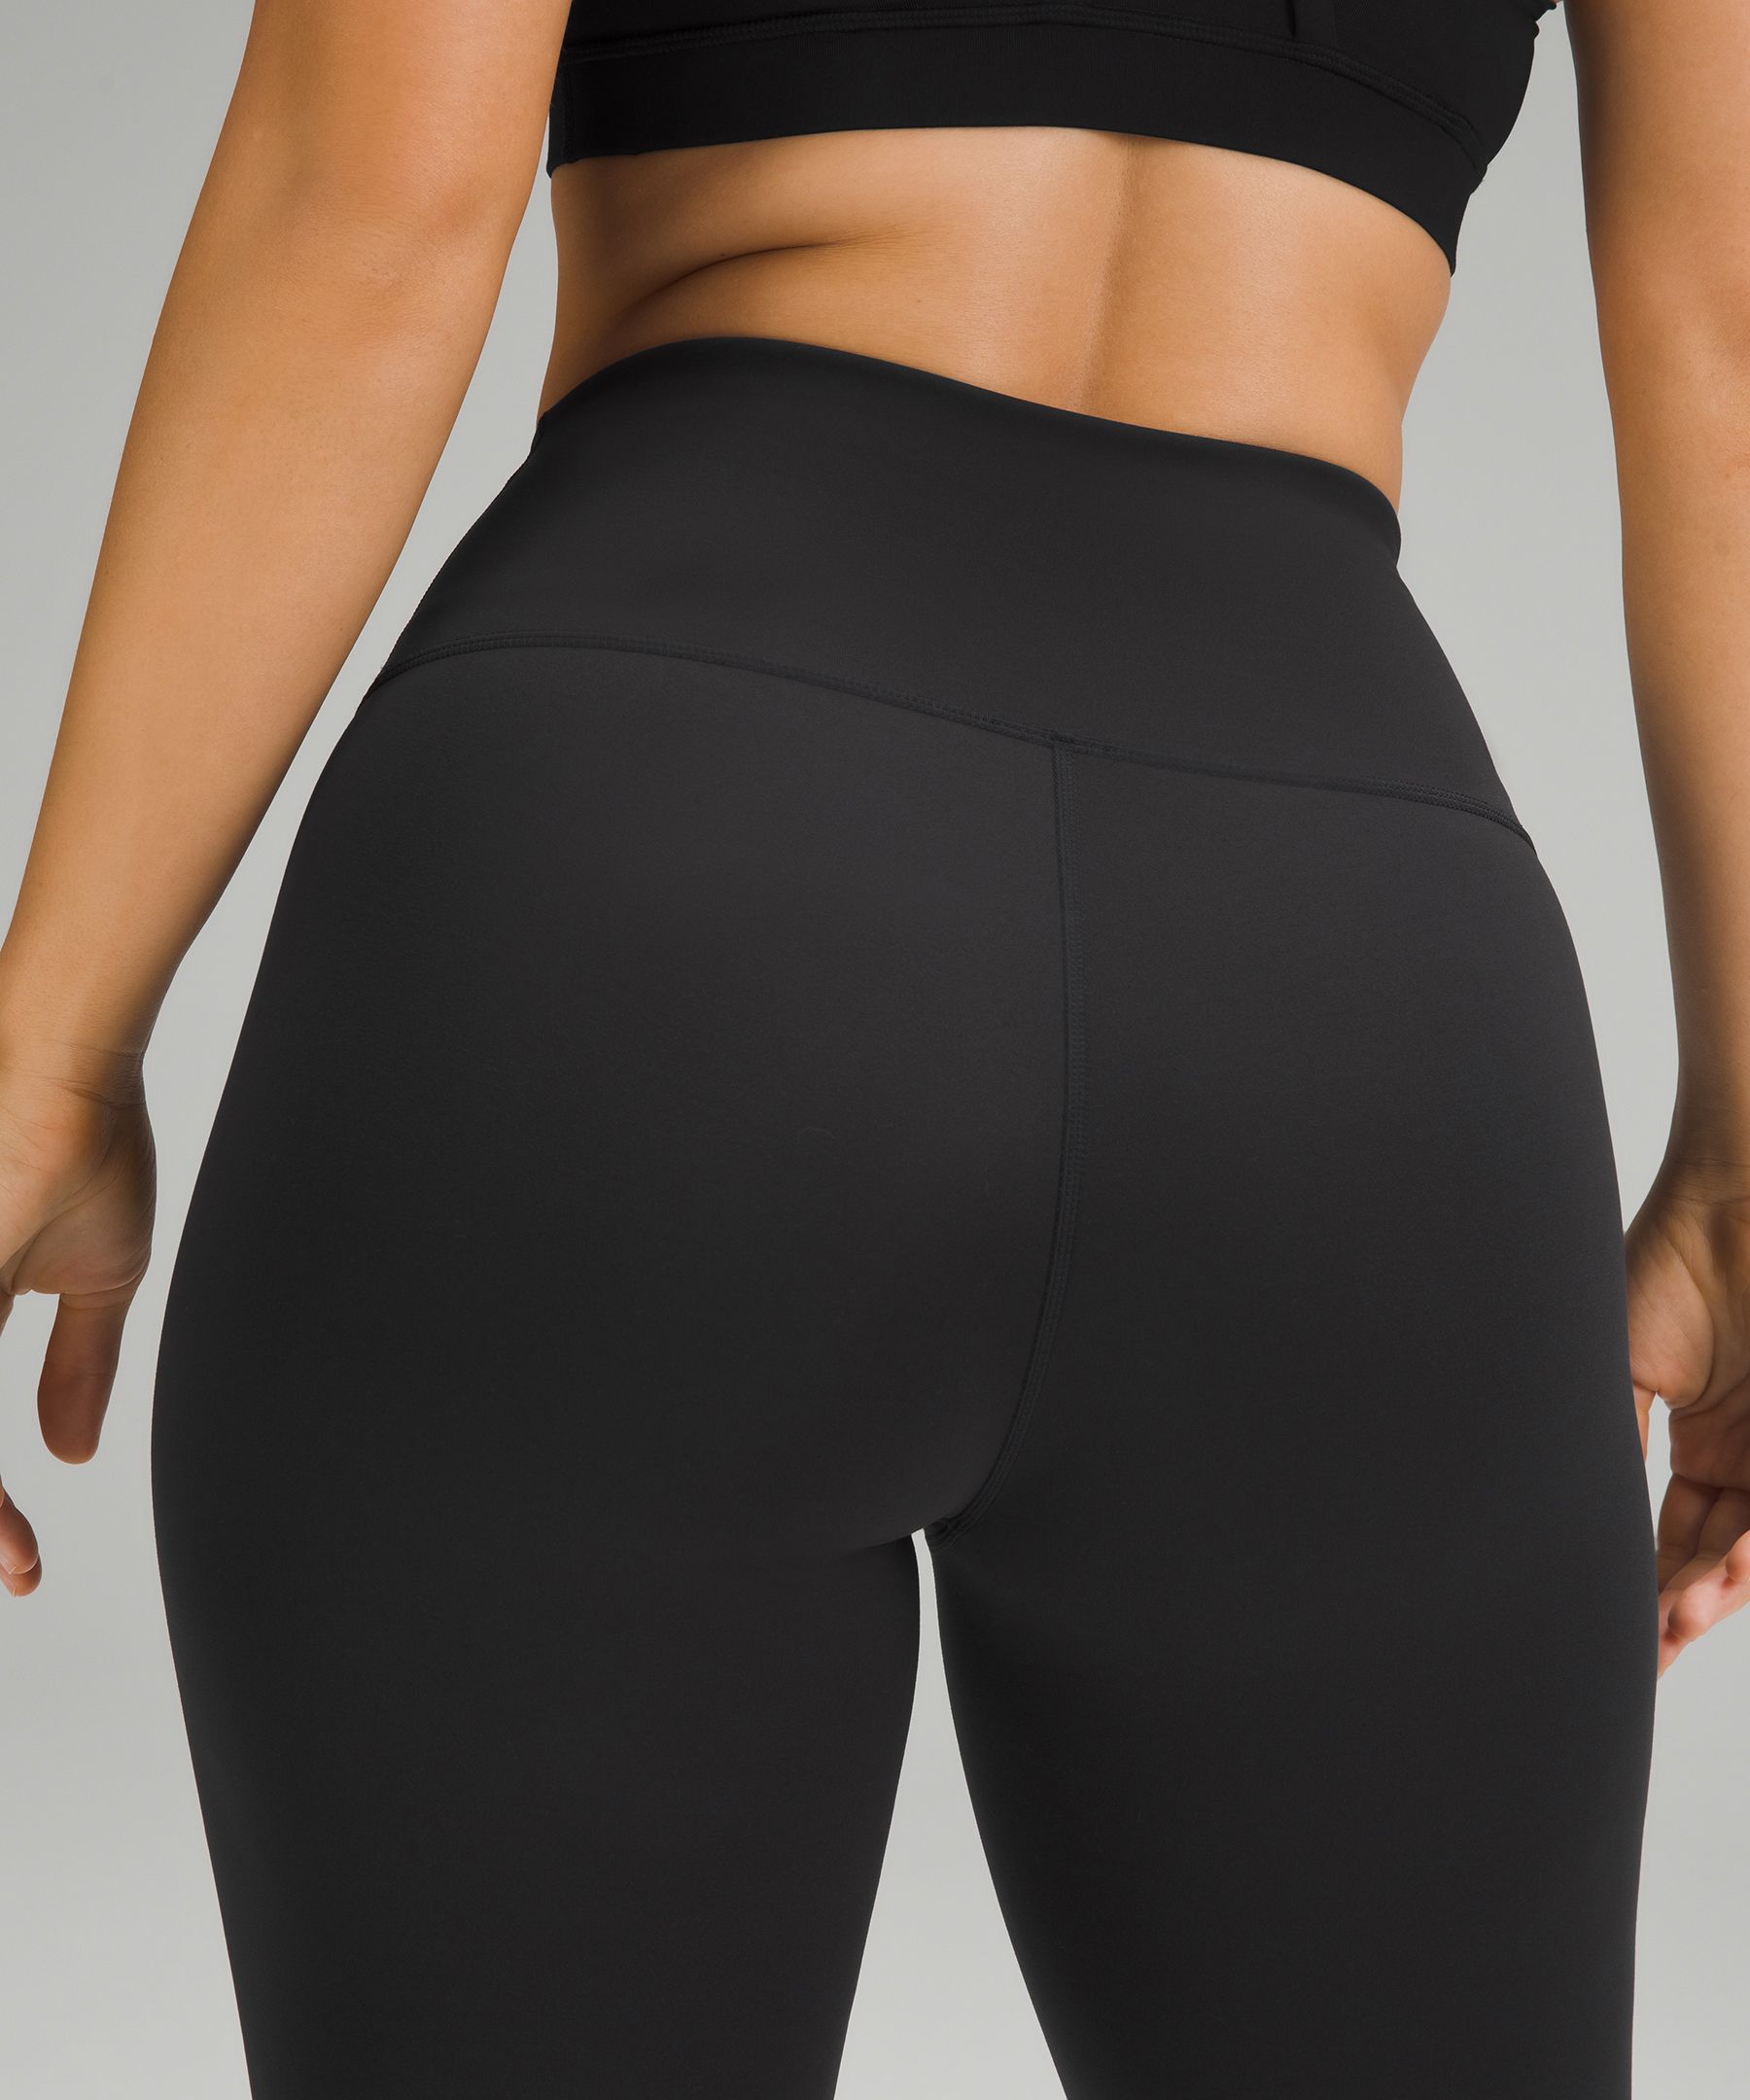 Lululemon Wunder Under High-Rise Tight Asia Fit Full-on Luxtreme Black,  Women's Fashion, Activewear on Carousell